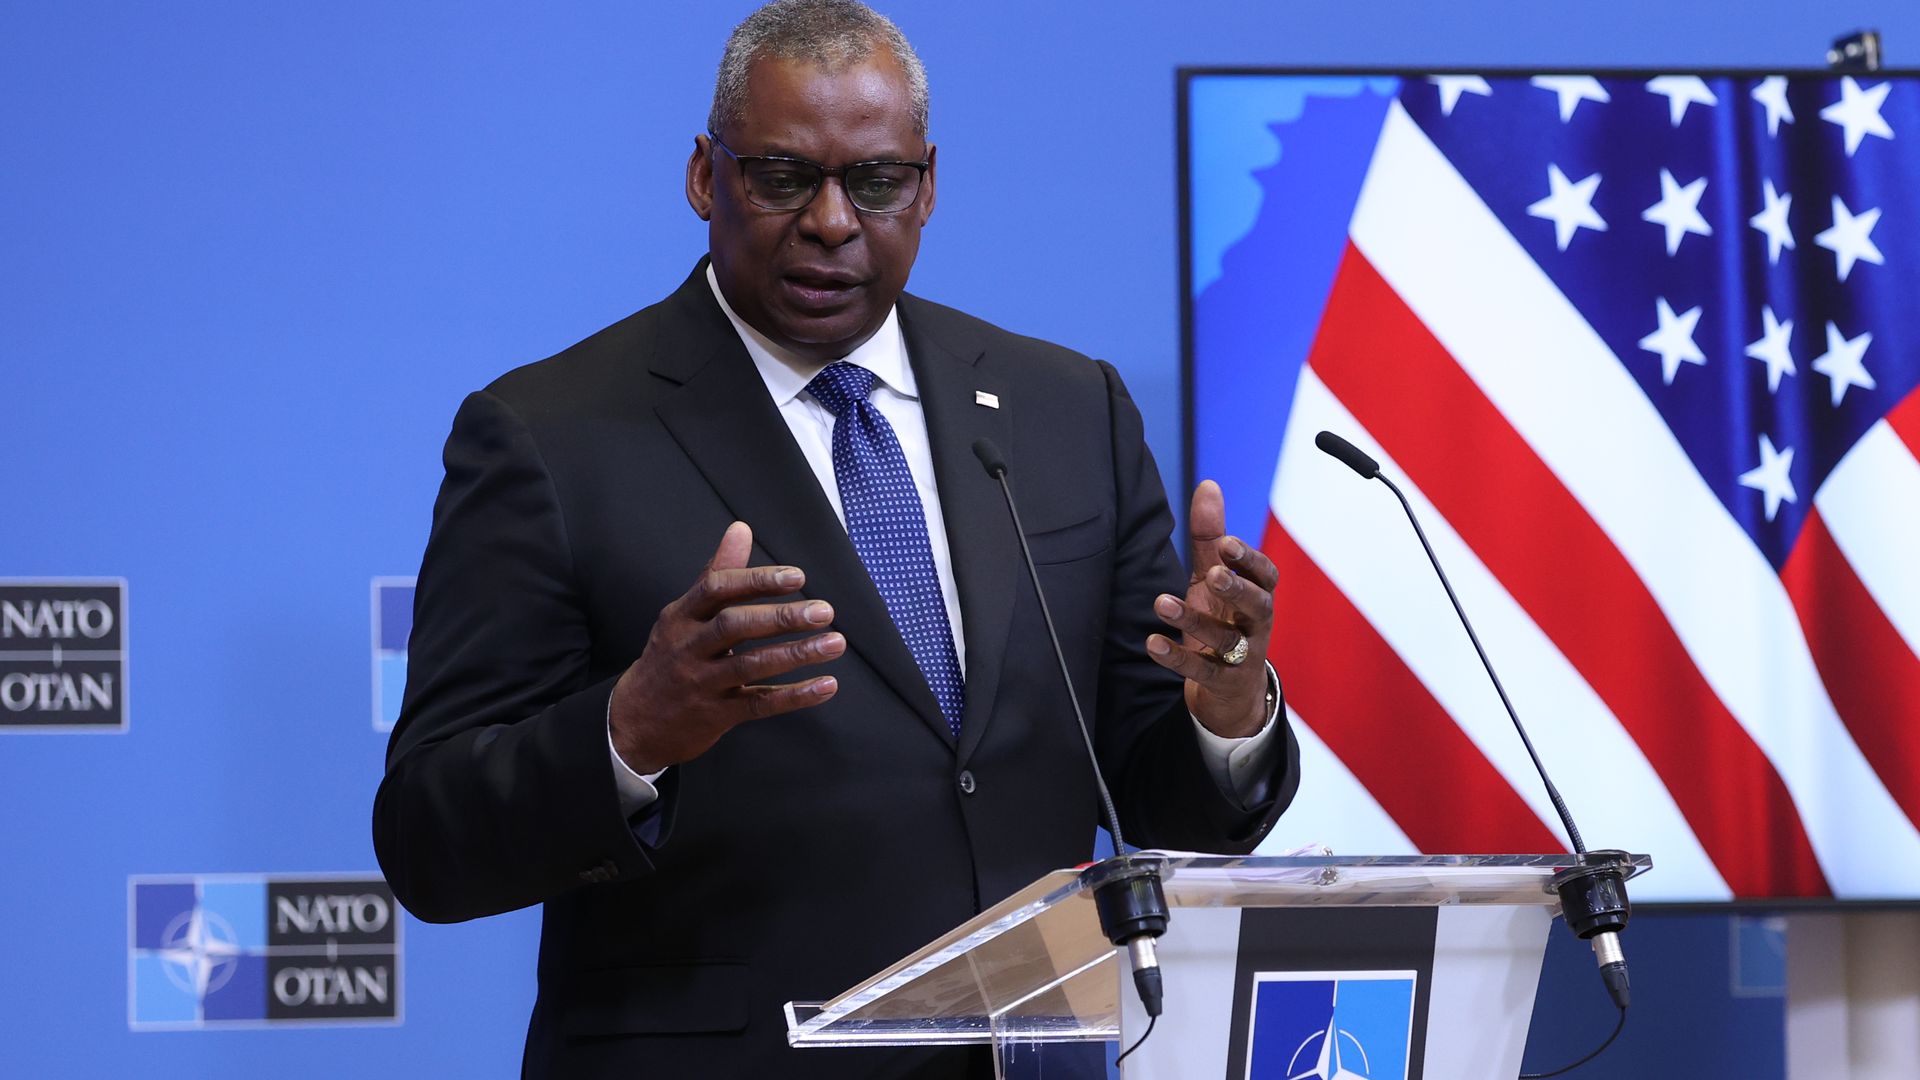 Defense Secretary Lloyd Austin speaking during a press conference at a NATO meeting in Brussels on June 16.